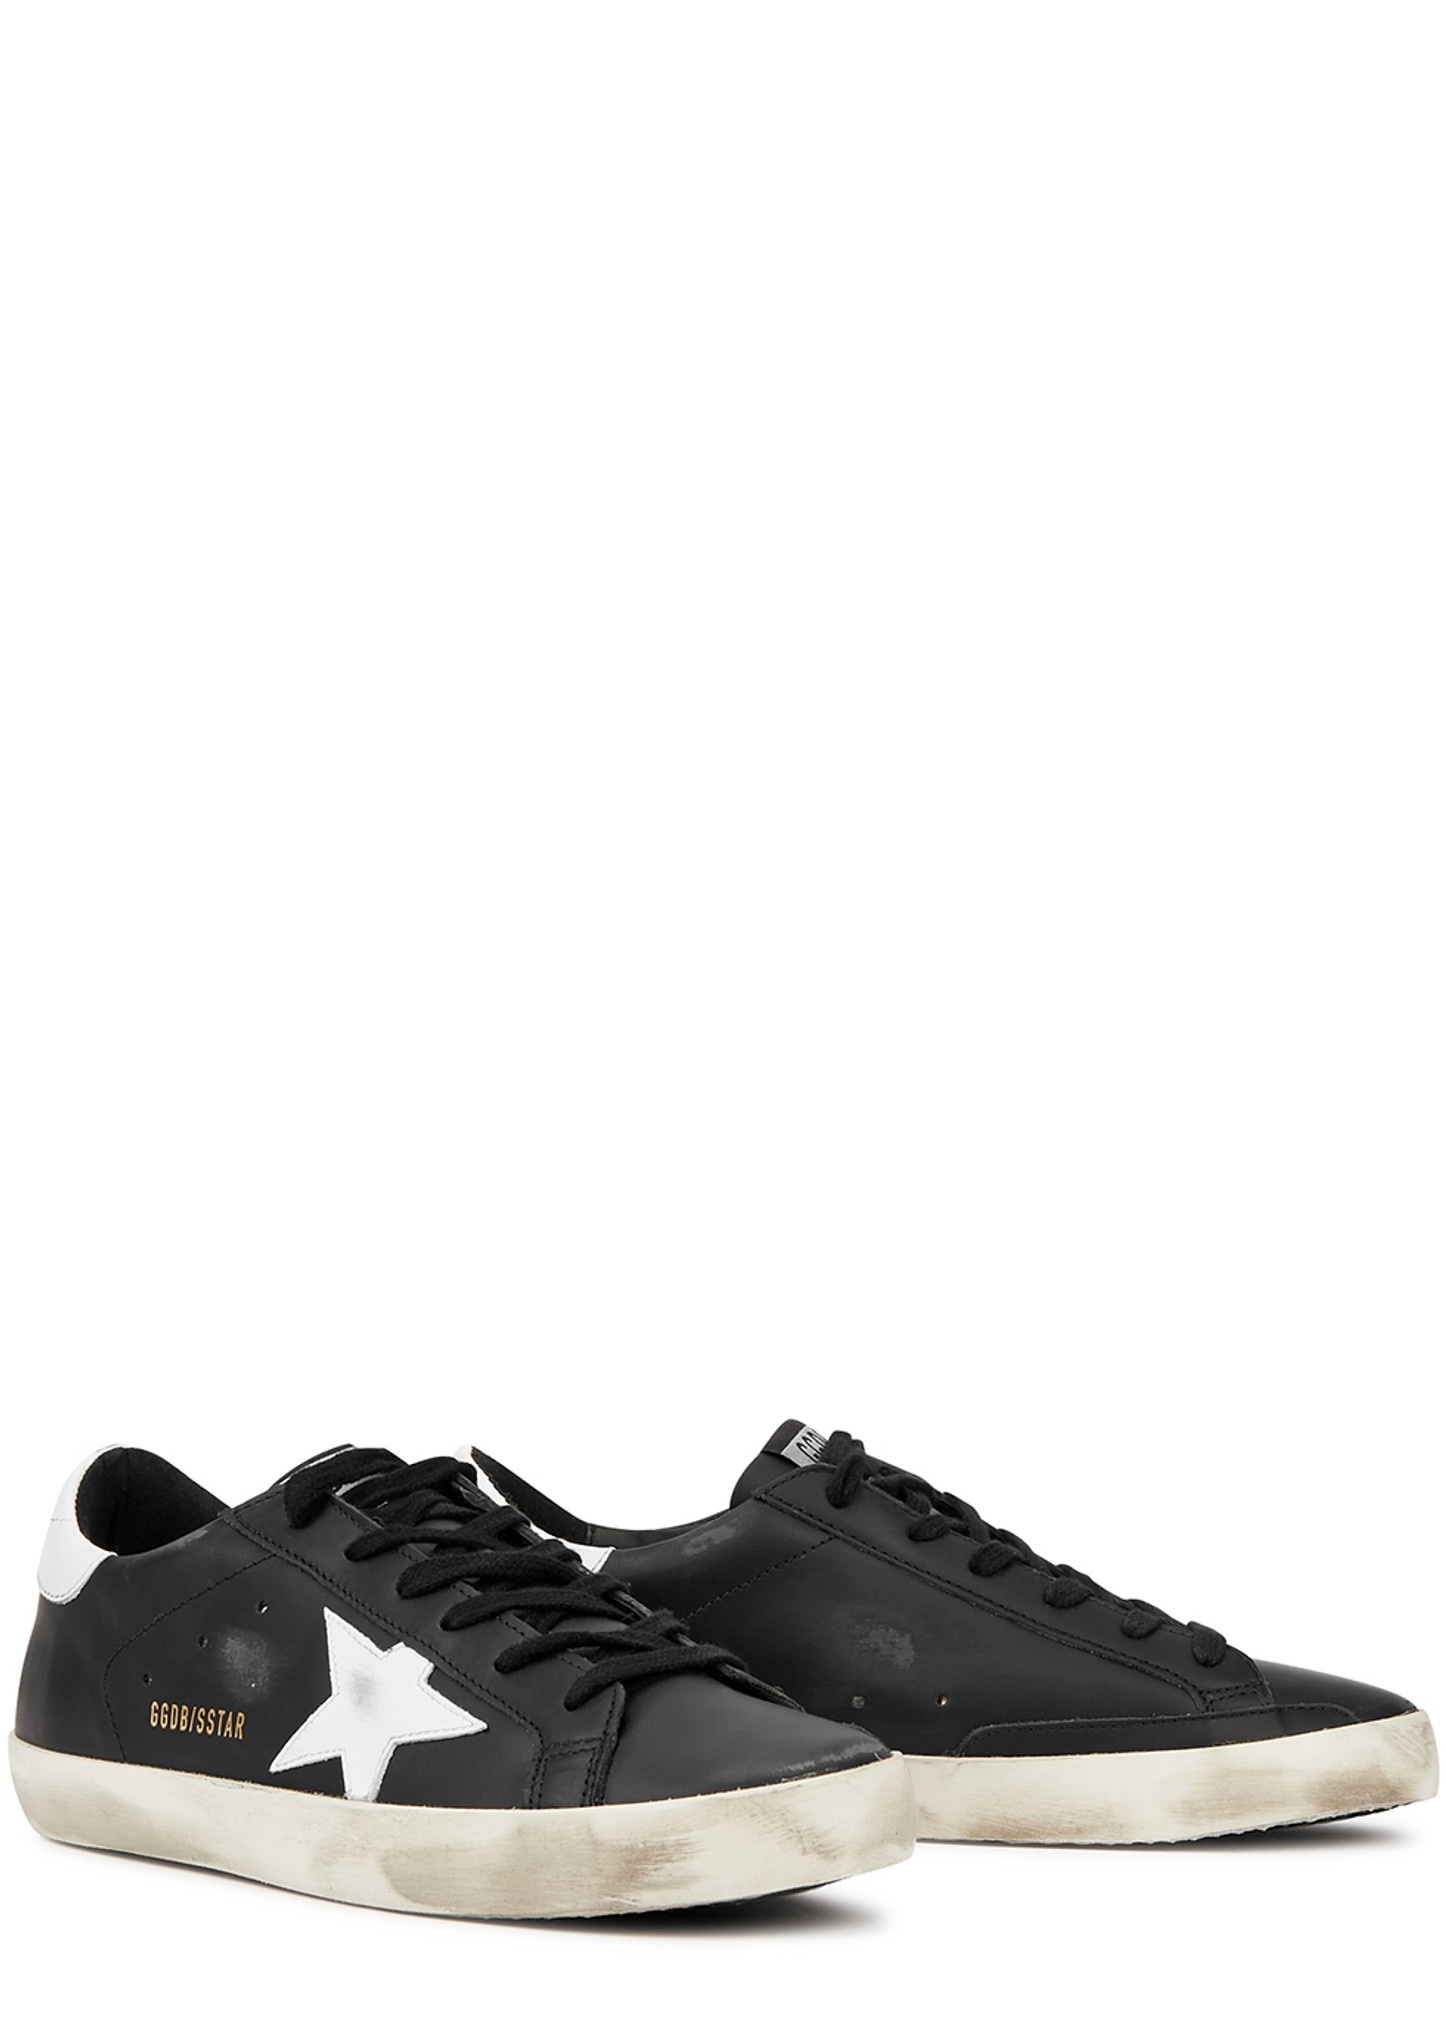 Superstar black distressed leather sneakers - 2